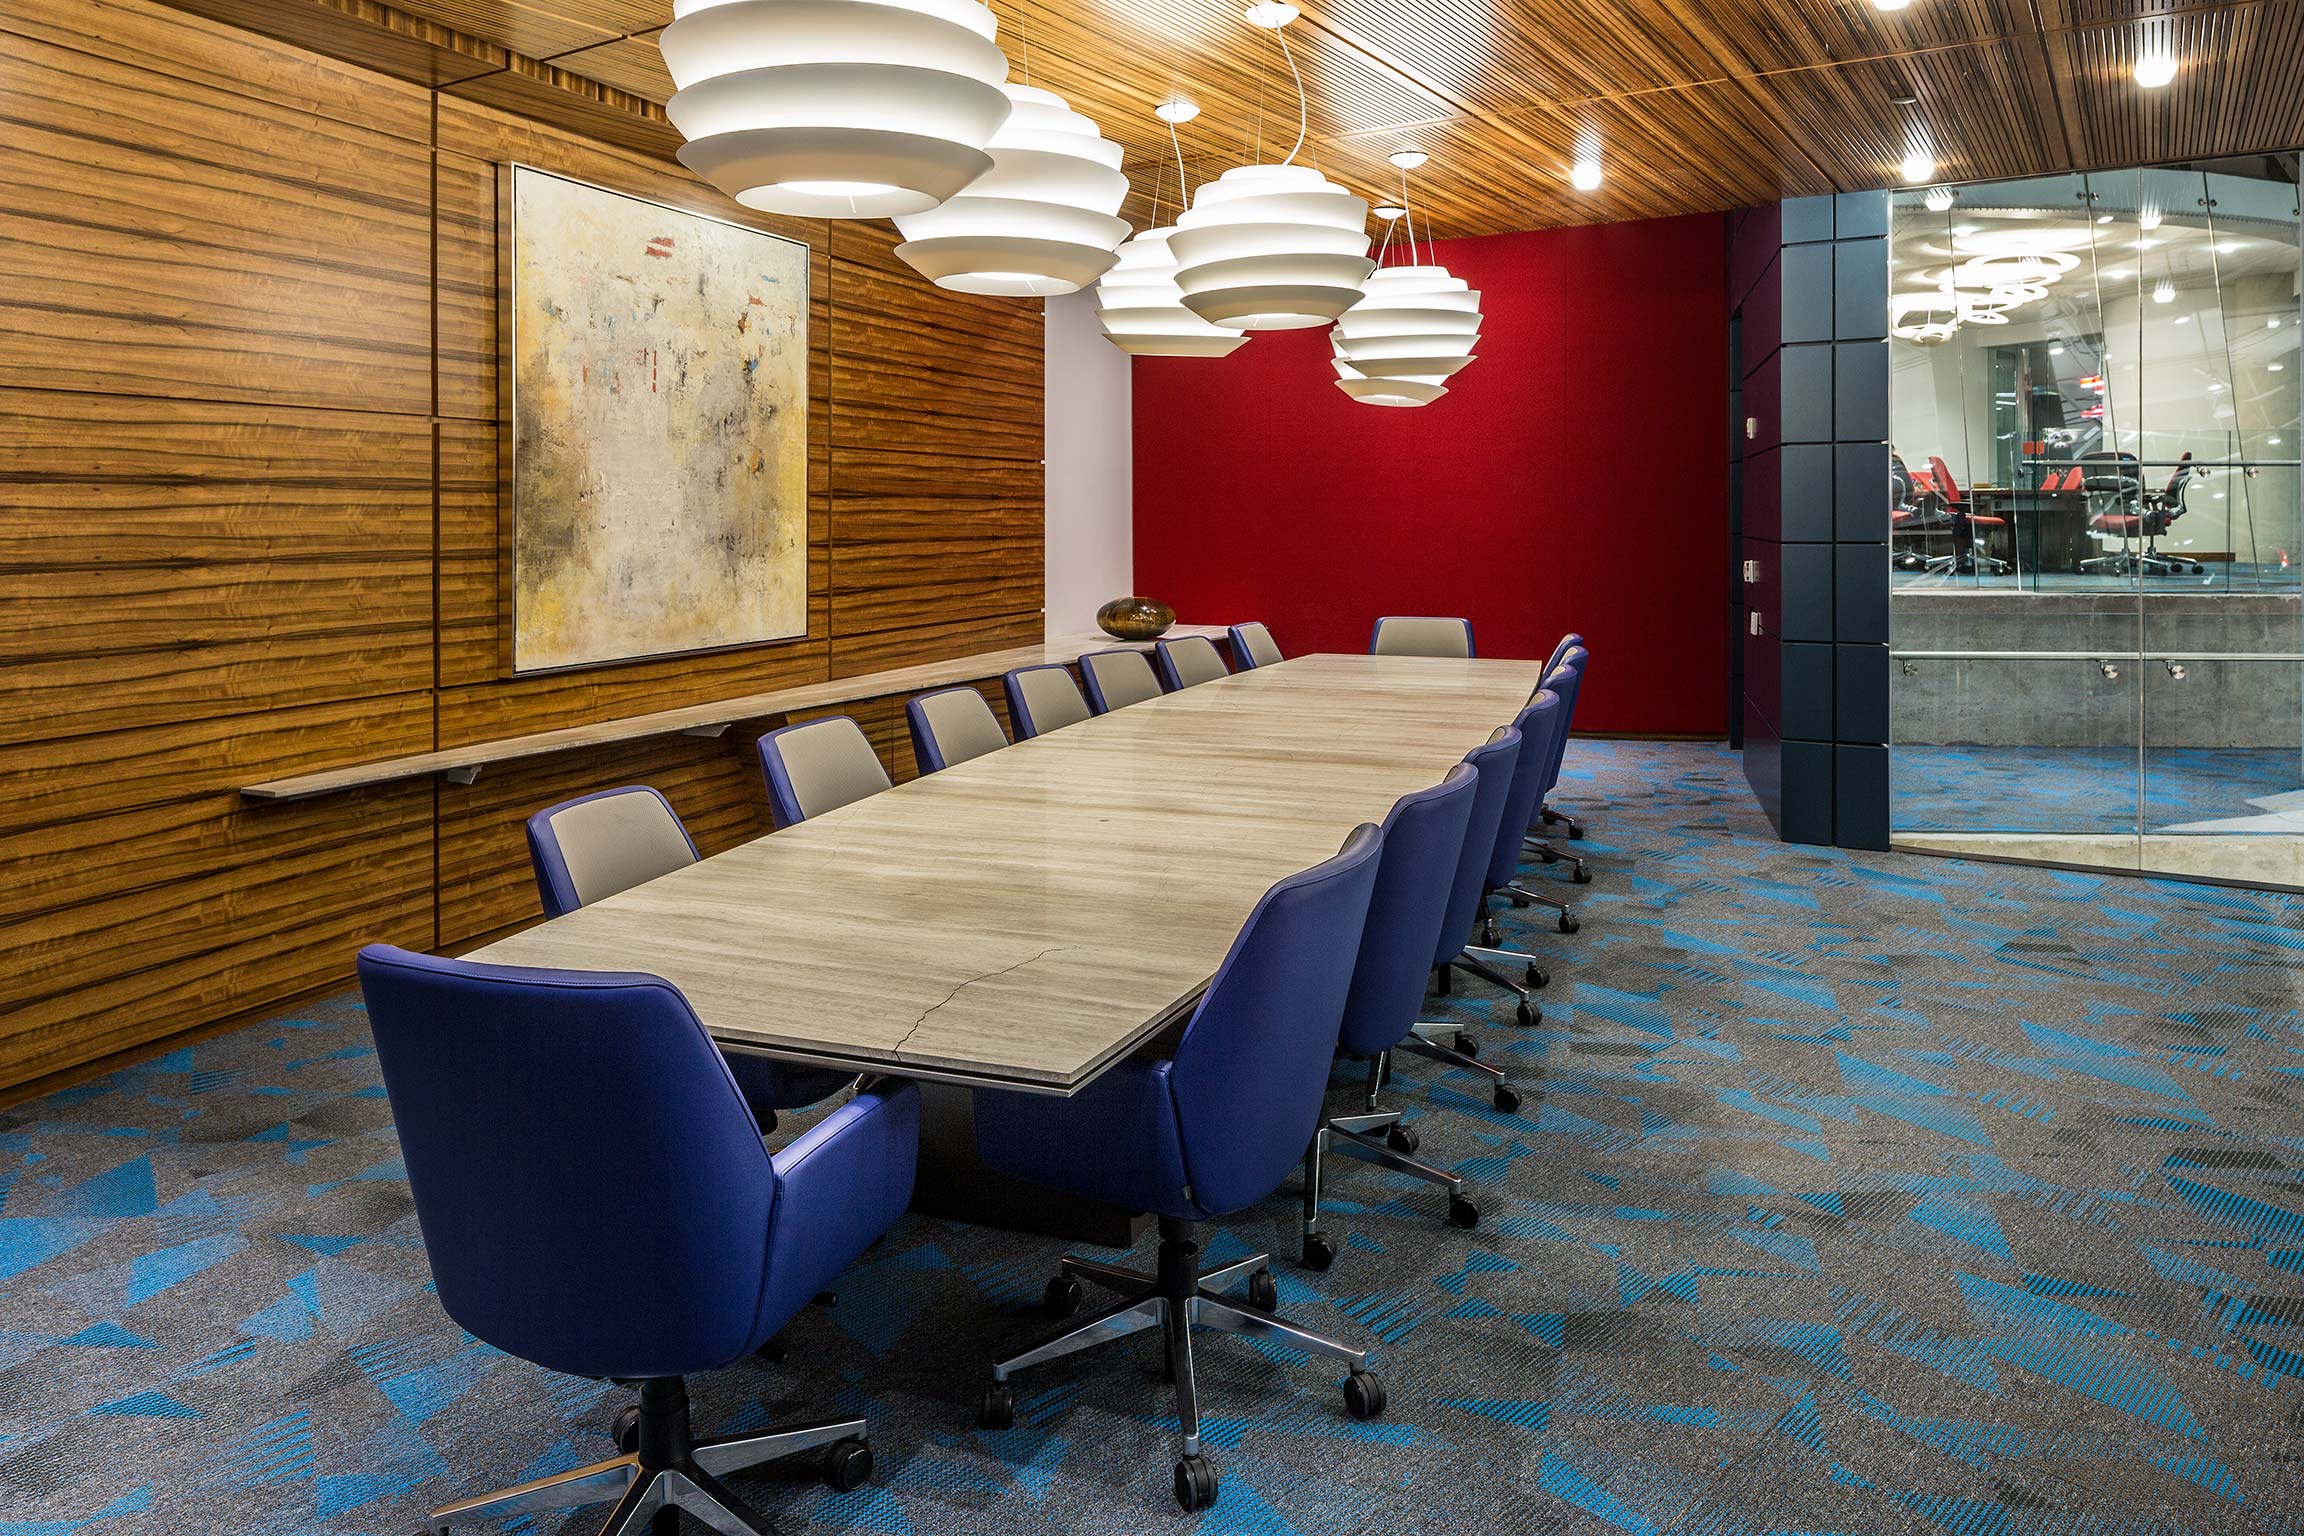 Conference room inside Intergraph Headquarters